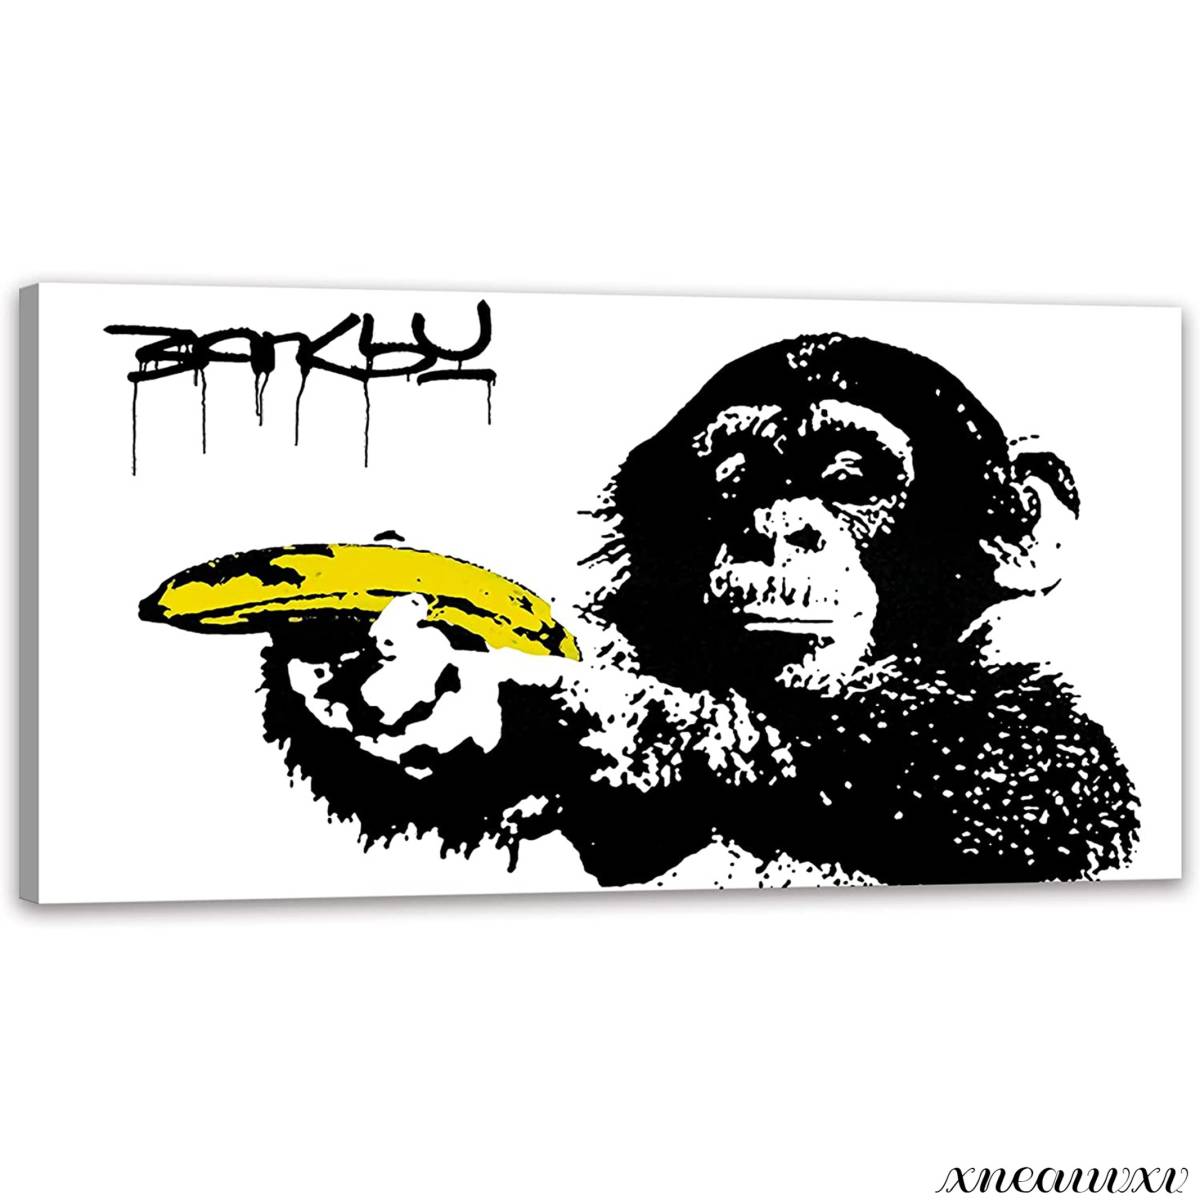 Banksy Large Art Panel Reproduction Interior Room Decoration Canvas Painting Wall Hanging Monochrome Simple Abstract Modern Chimpanzee, artwork, painting, graphic